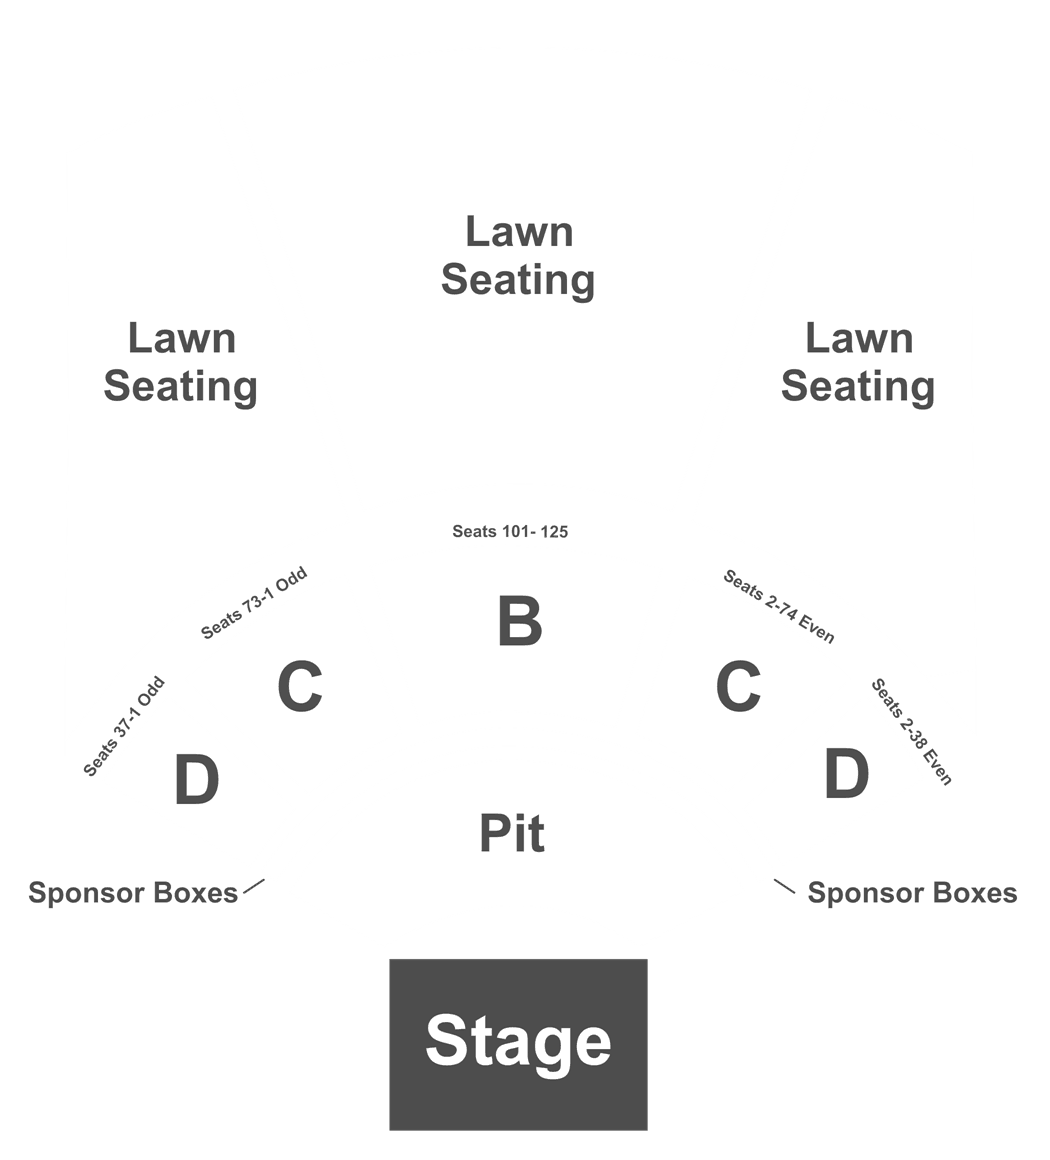 The Amp Rogers Ar Seating Chart